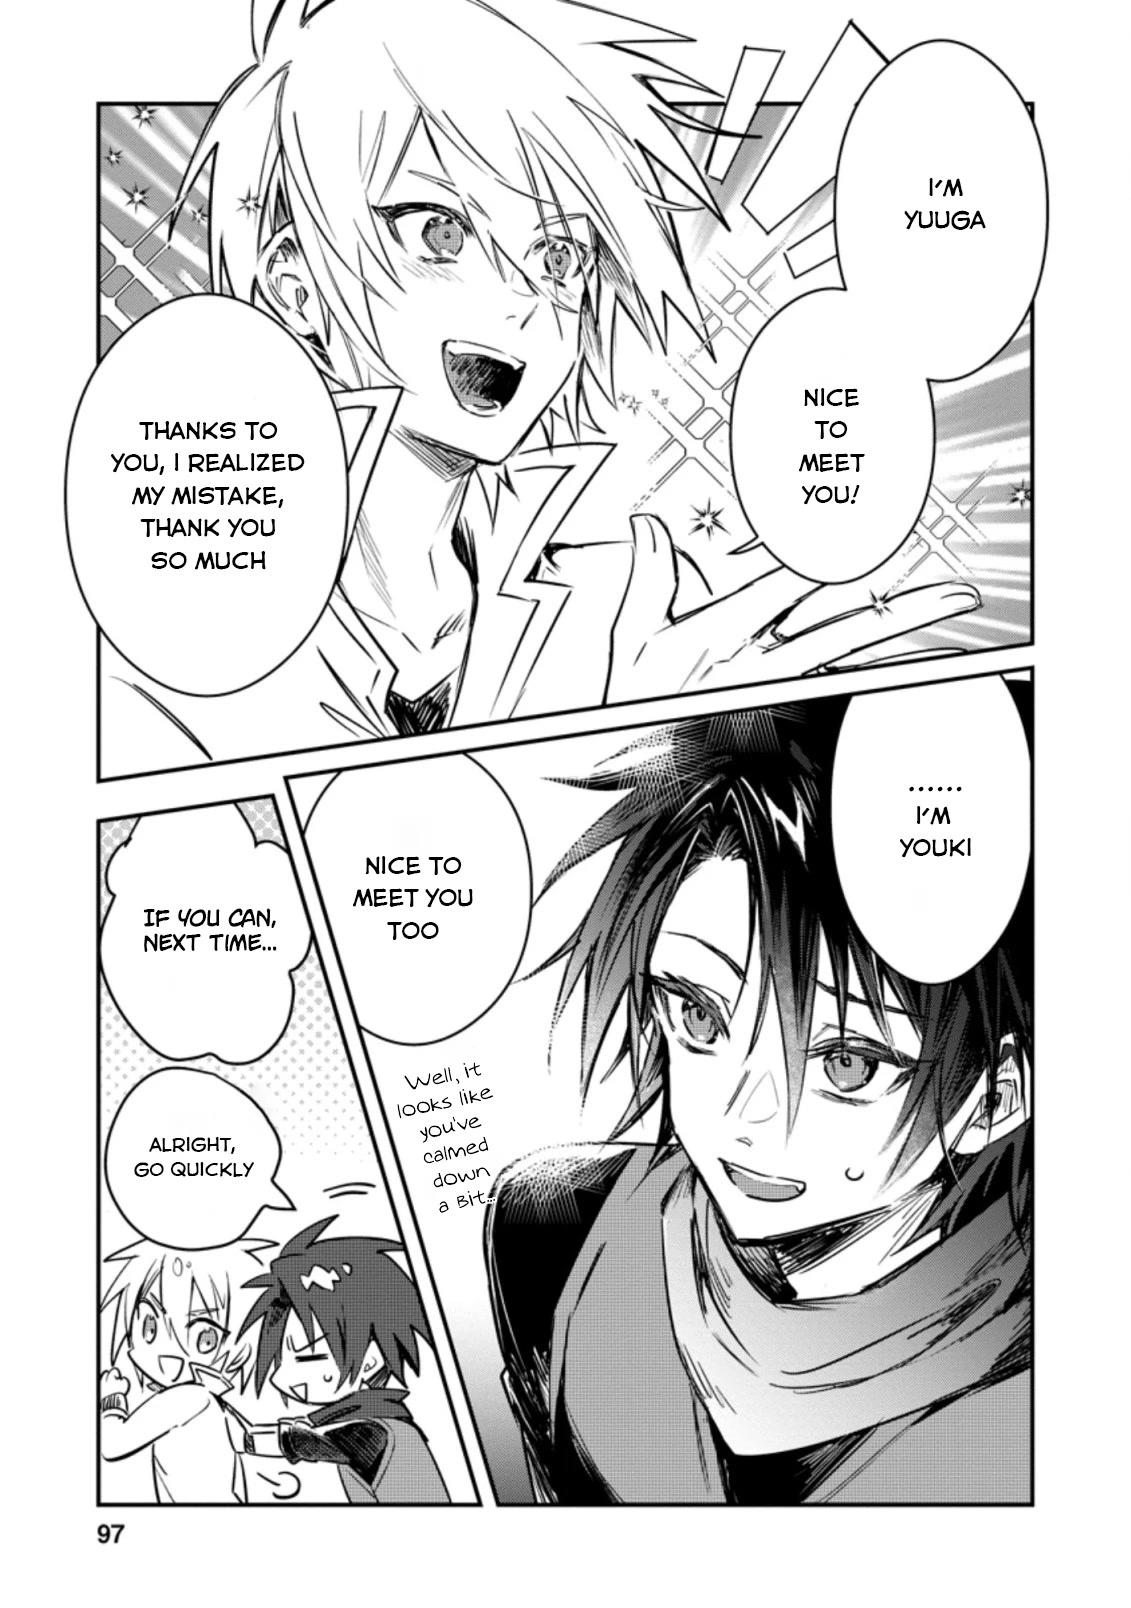 Read There Was A Cute Girl In The Hero'S Party, So I Tried Confessing To  Her Chapter 14 - Manganelo